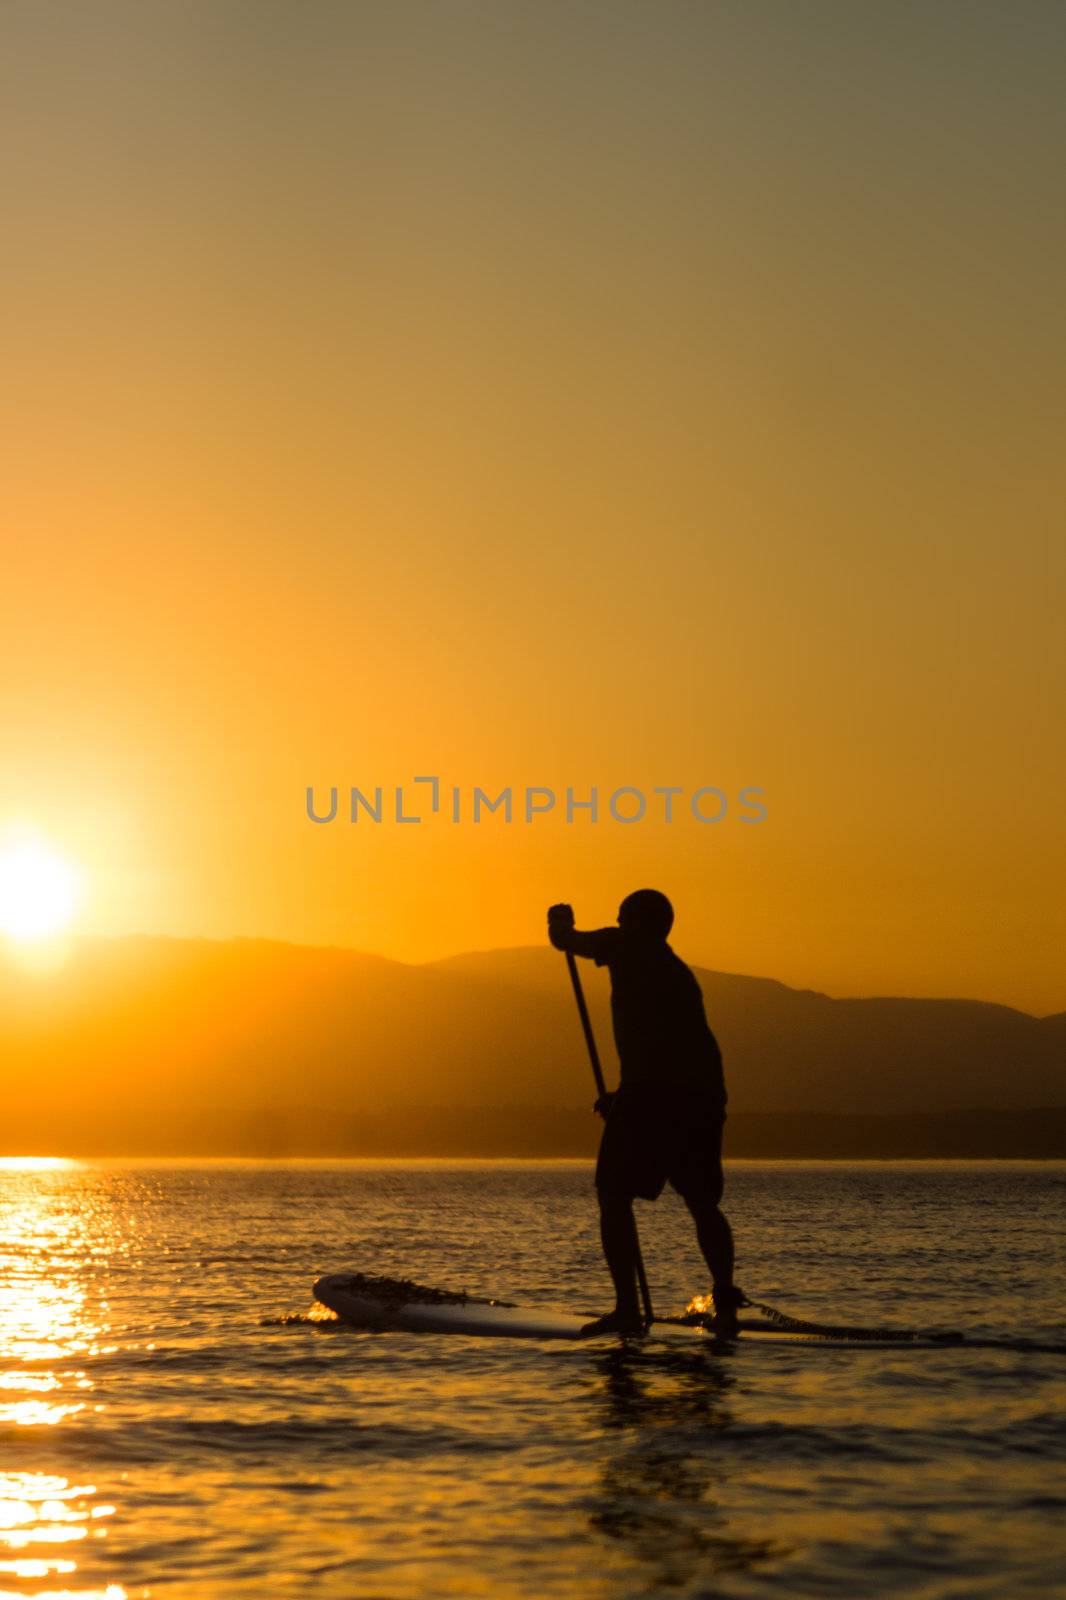 Man paddling stand up paddle board by sketchyT